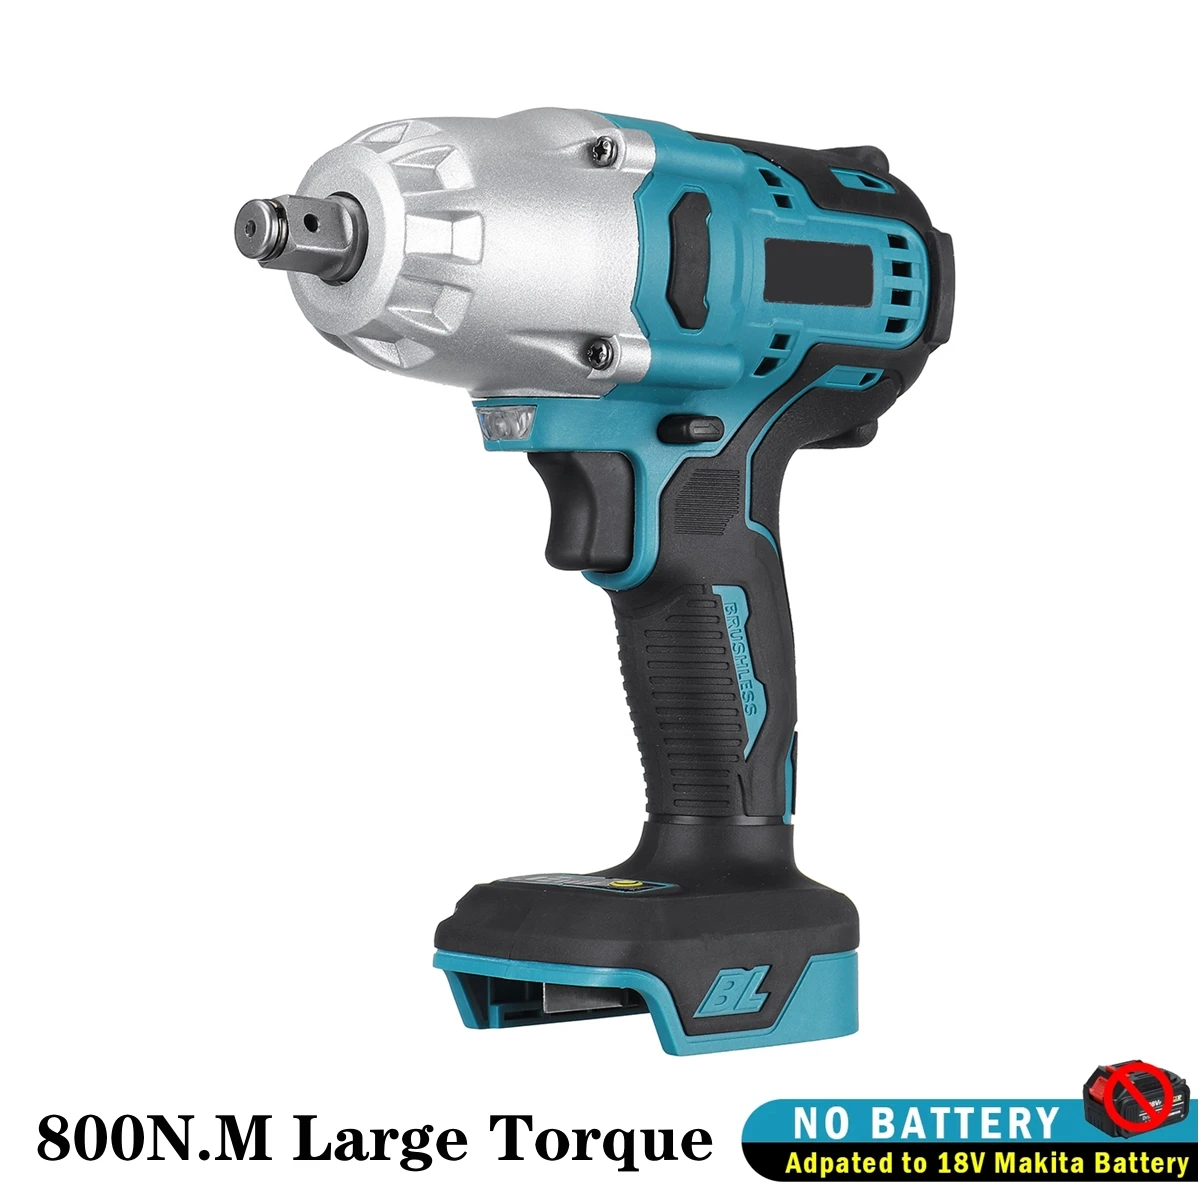 800N.m Real Torque Brushless Electric Impact Wrench W/ 4 Gears Adjustable 1/2 Inch Car Repair Tool Compatible Makita 18V Battery